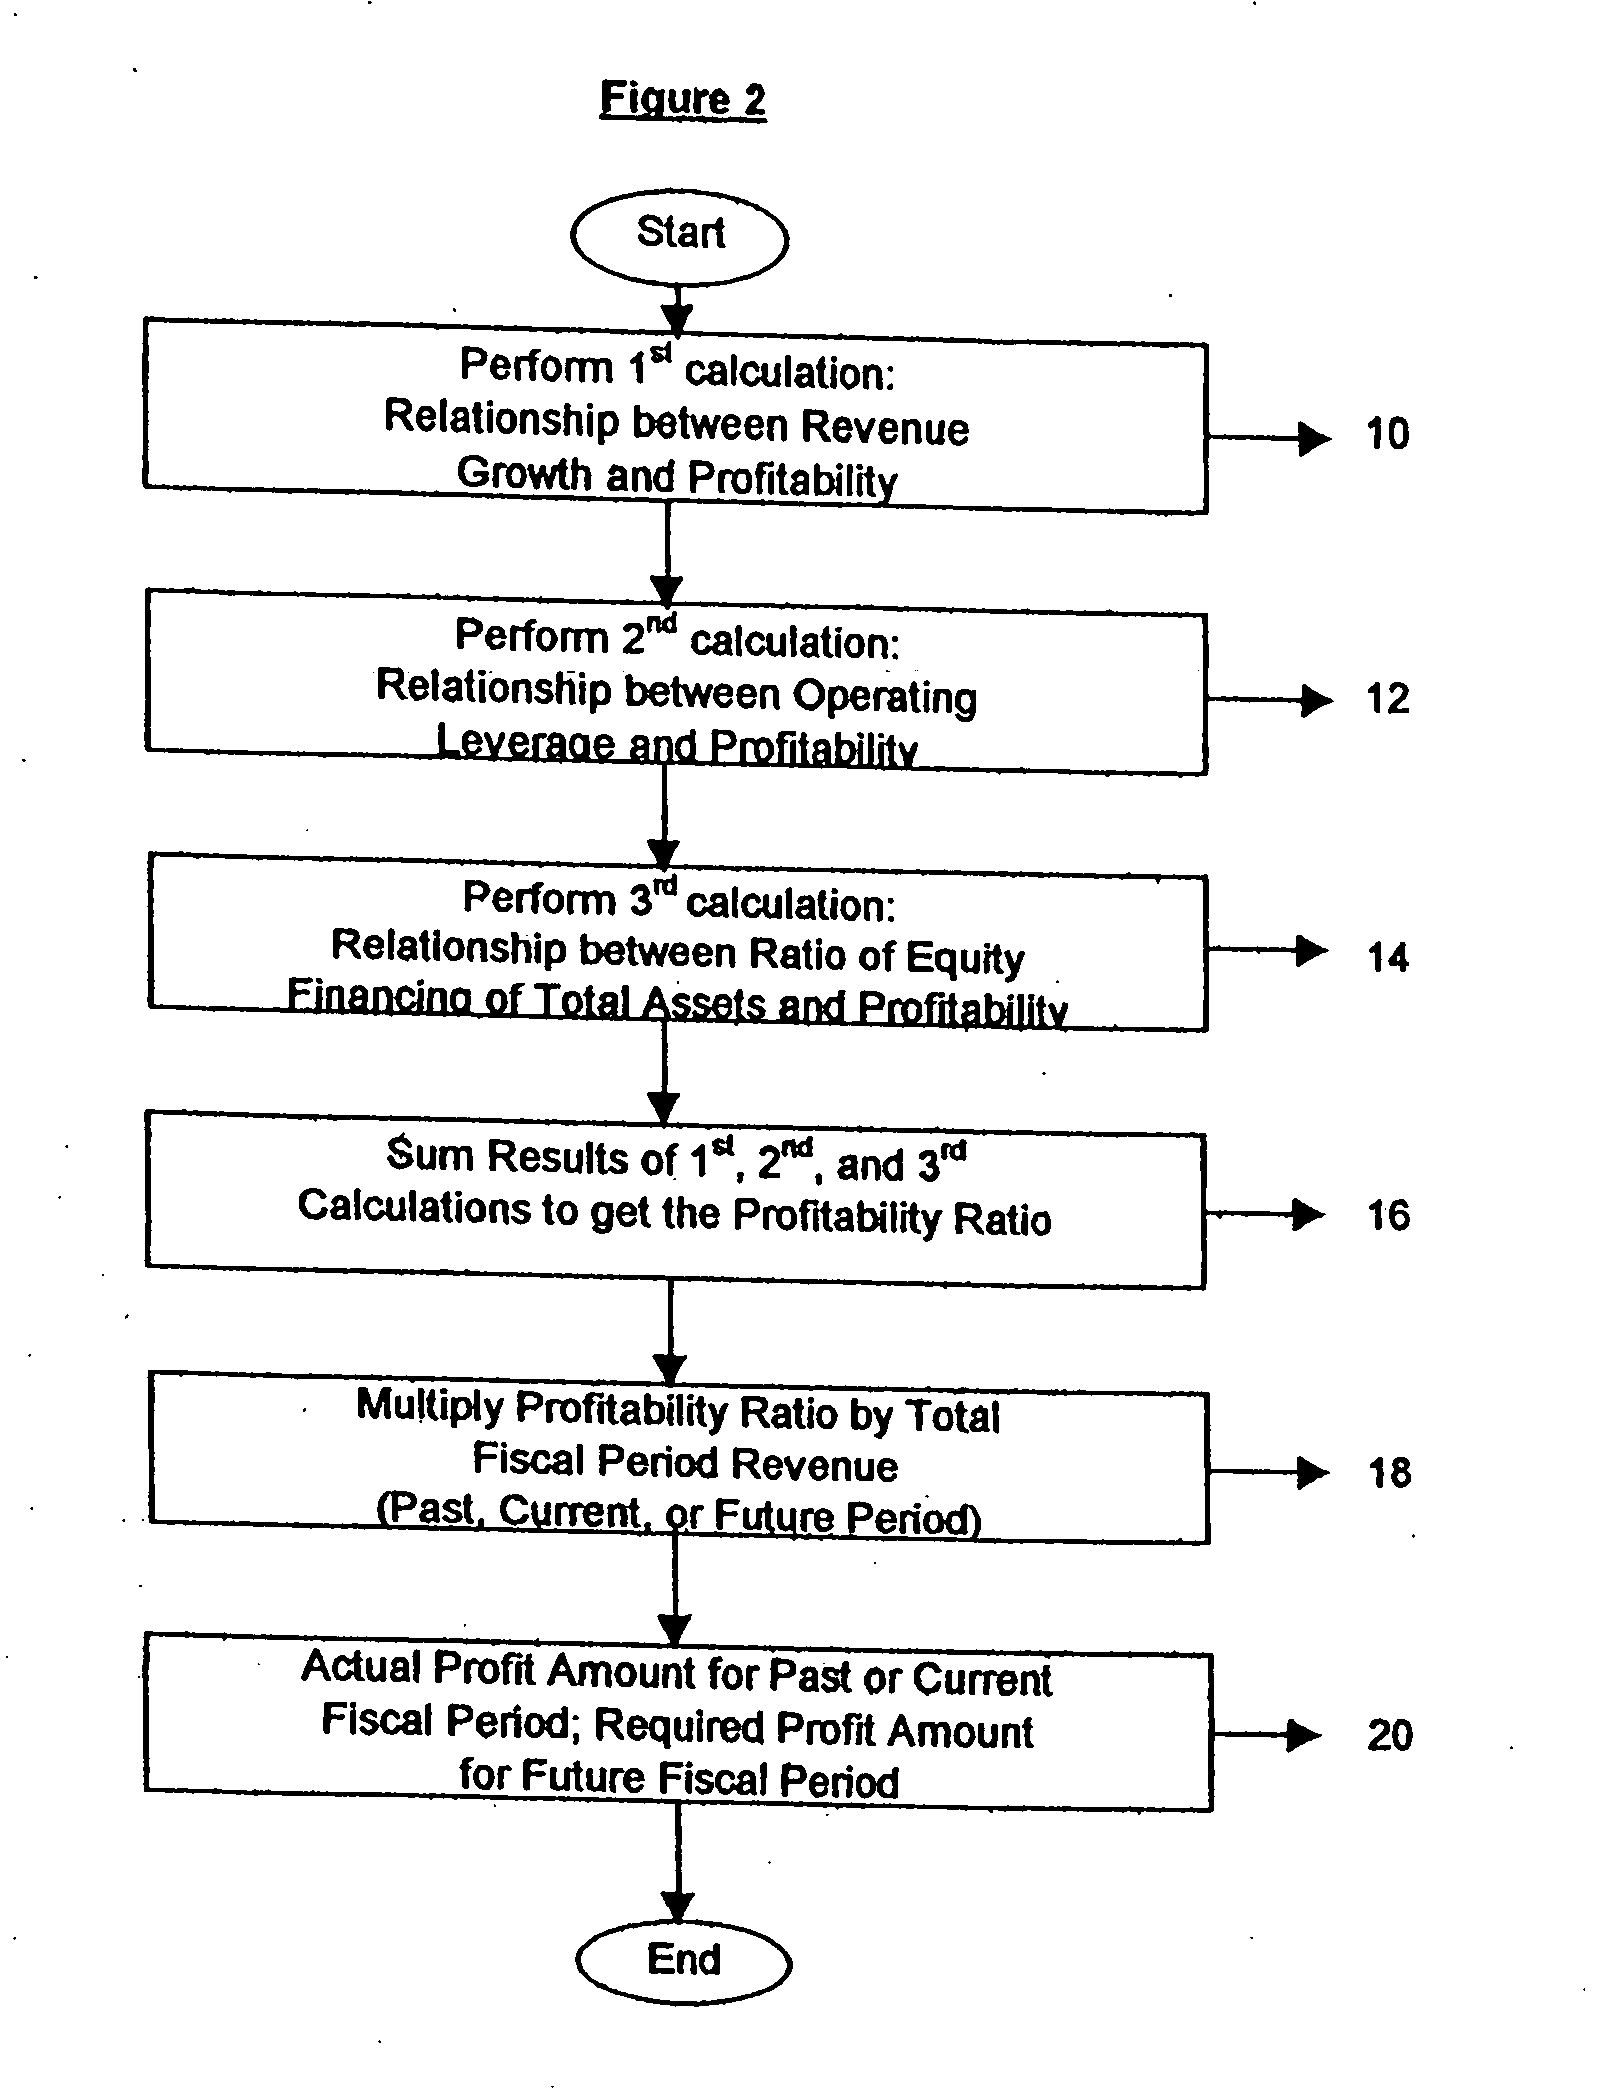 Method and system for analyzing the use of profitability of an organization